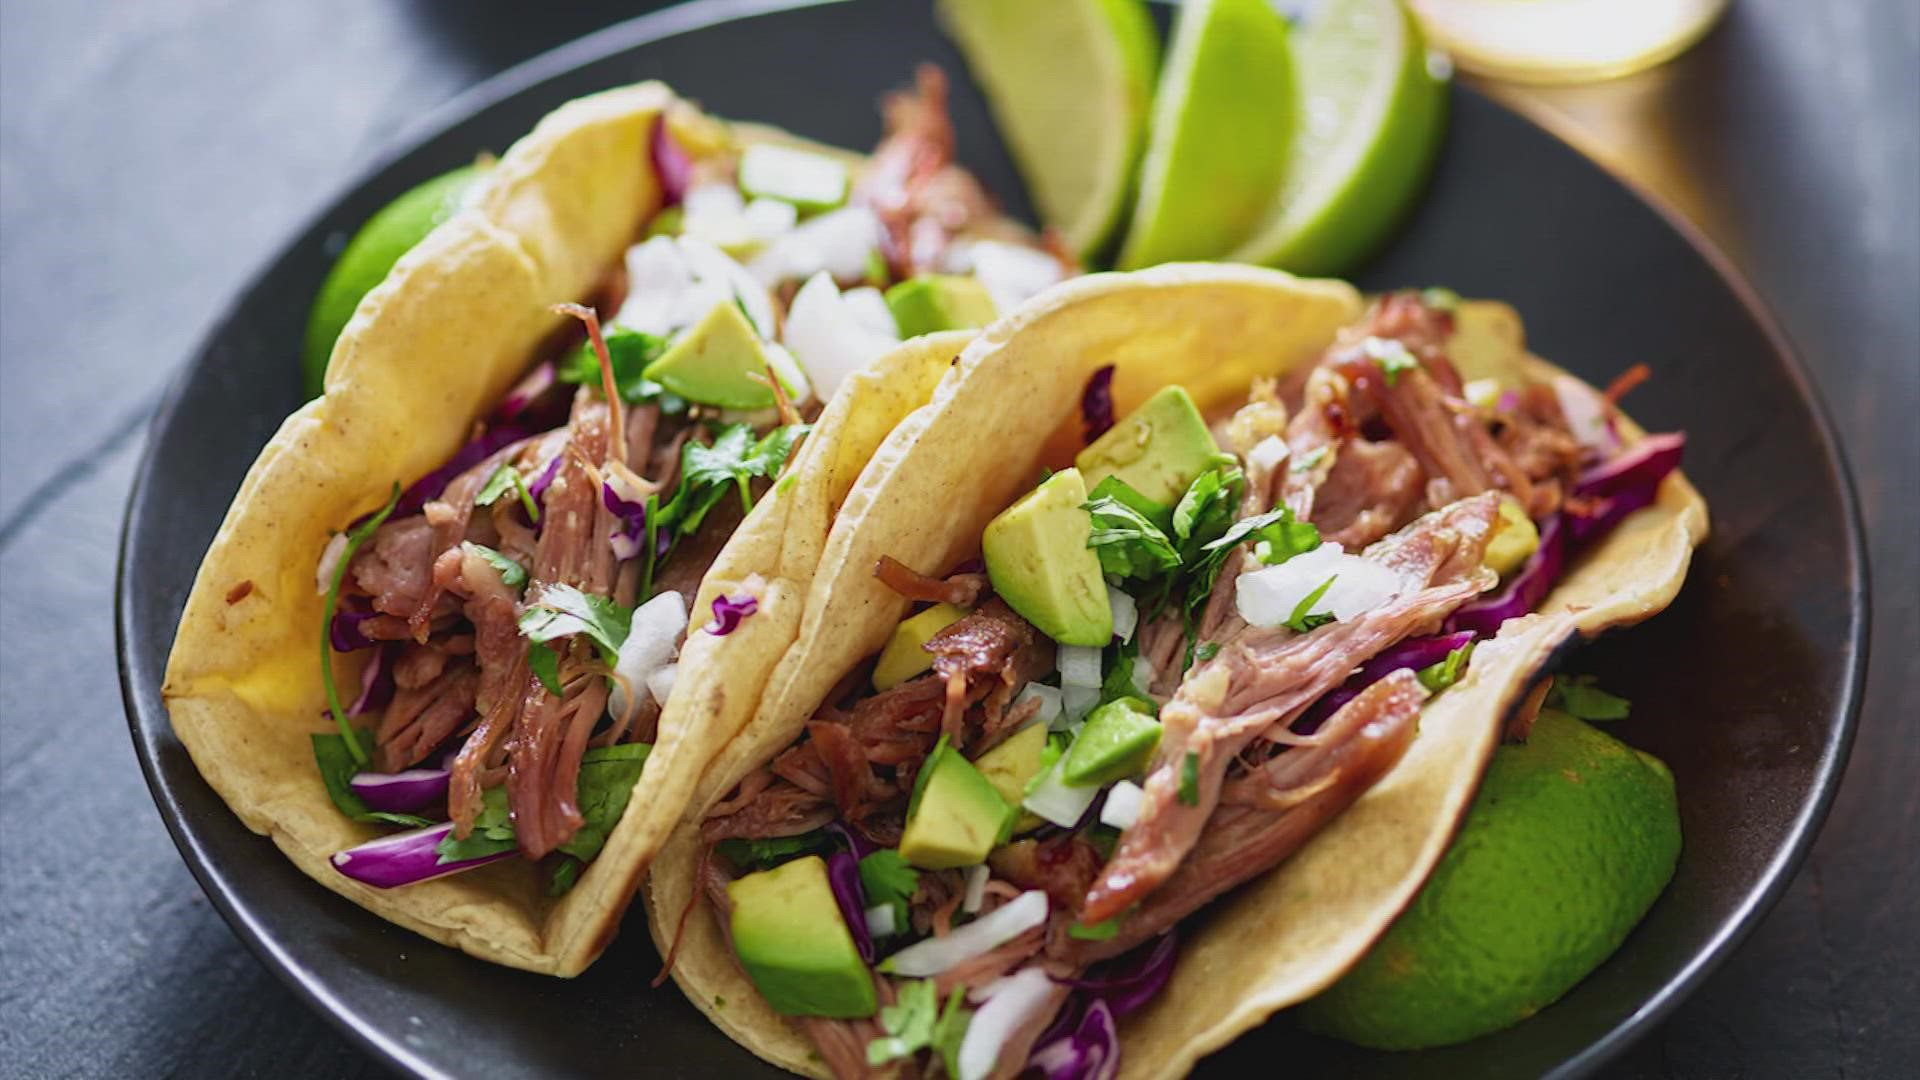 Submissions are open for Favor’s CTO, offering $10,000 to discover the best tacos across Texas.